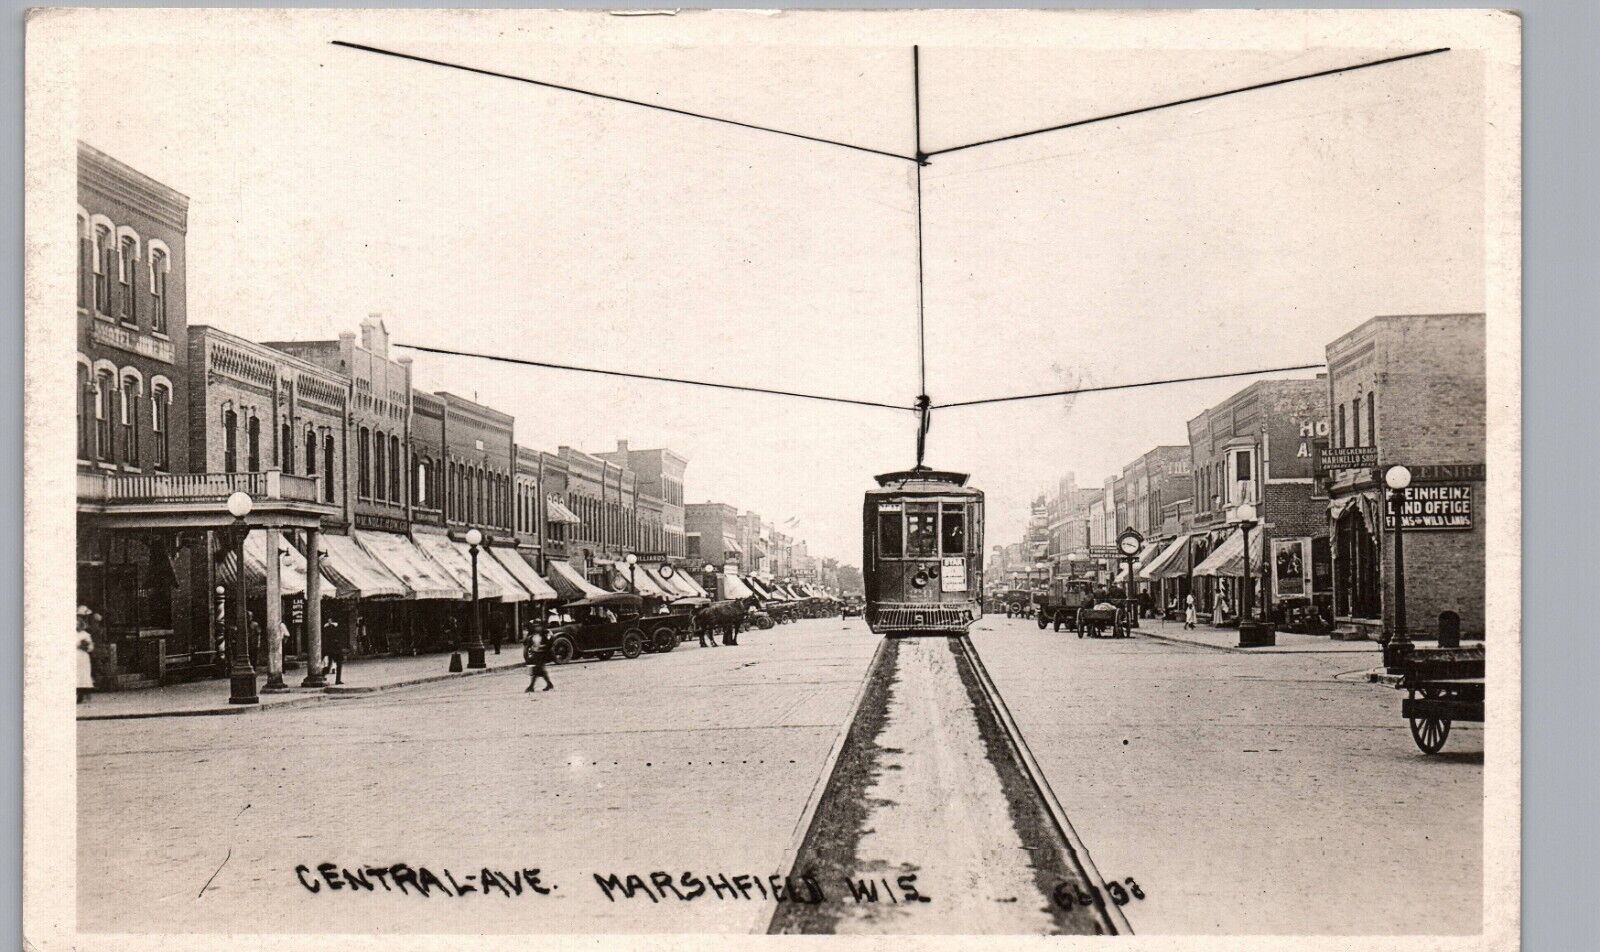 MARSHFIELD WI CENTRAL AVE TROLLEY real photo postcard rppc wisconsin main street